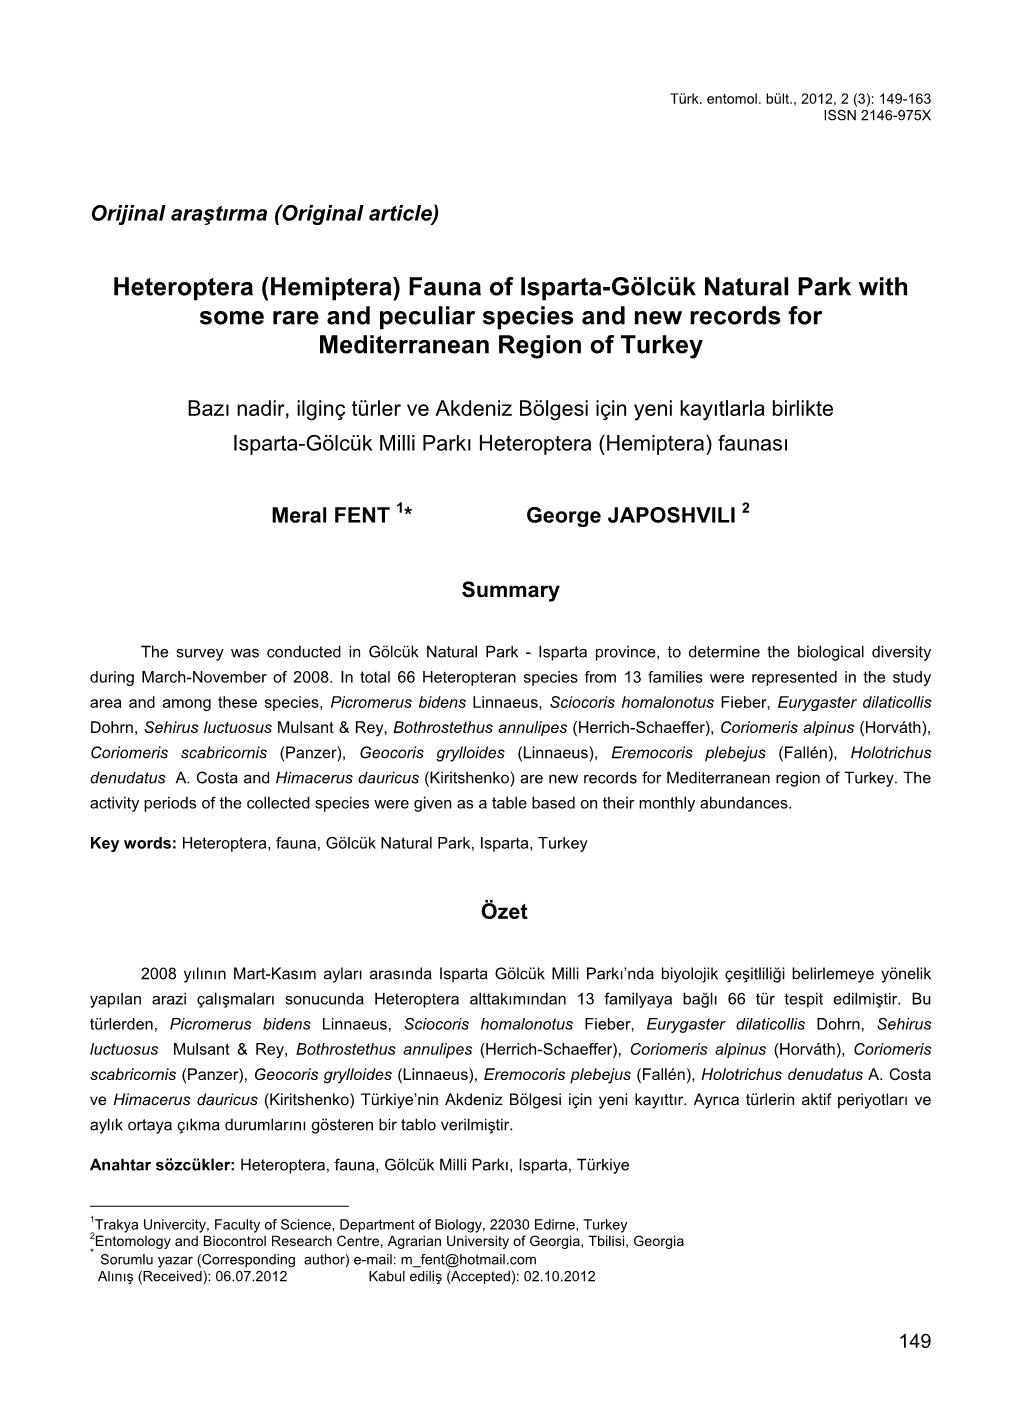 Heteroptera (Hemiptera) Fauna of Isparta-Gölcük Natural Park with Some Rare and Peculiar Species and New Records for Mediterranean Region of Turkey